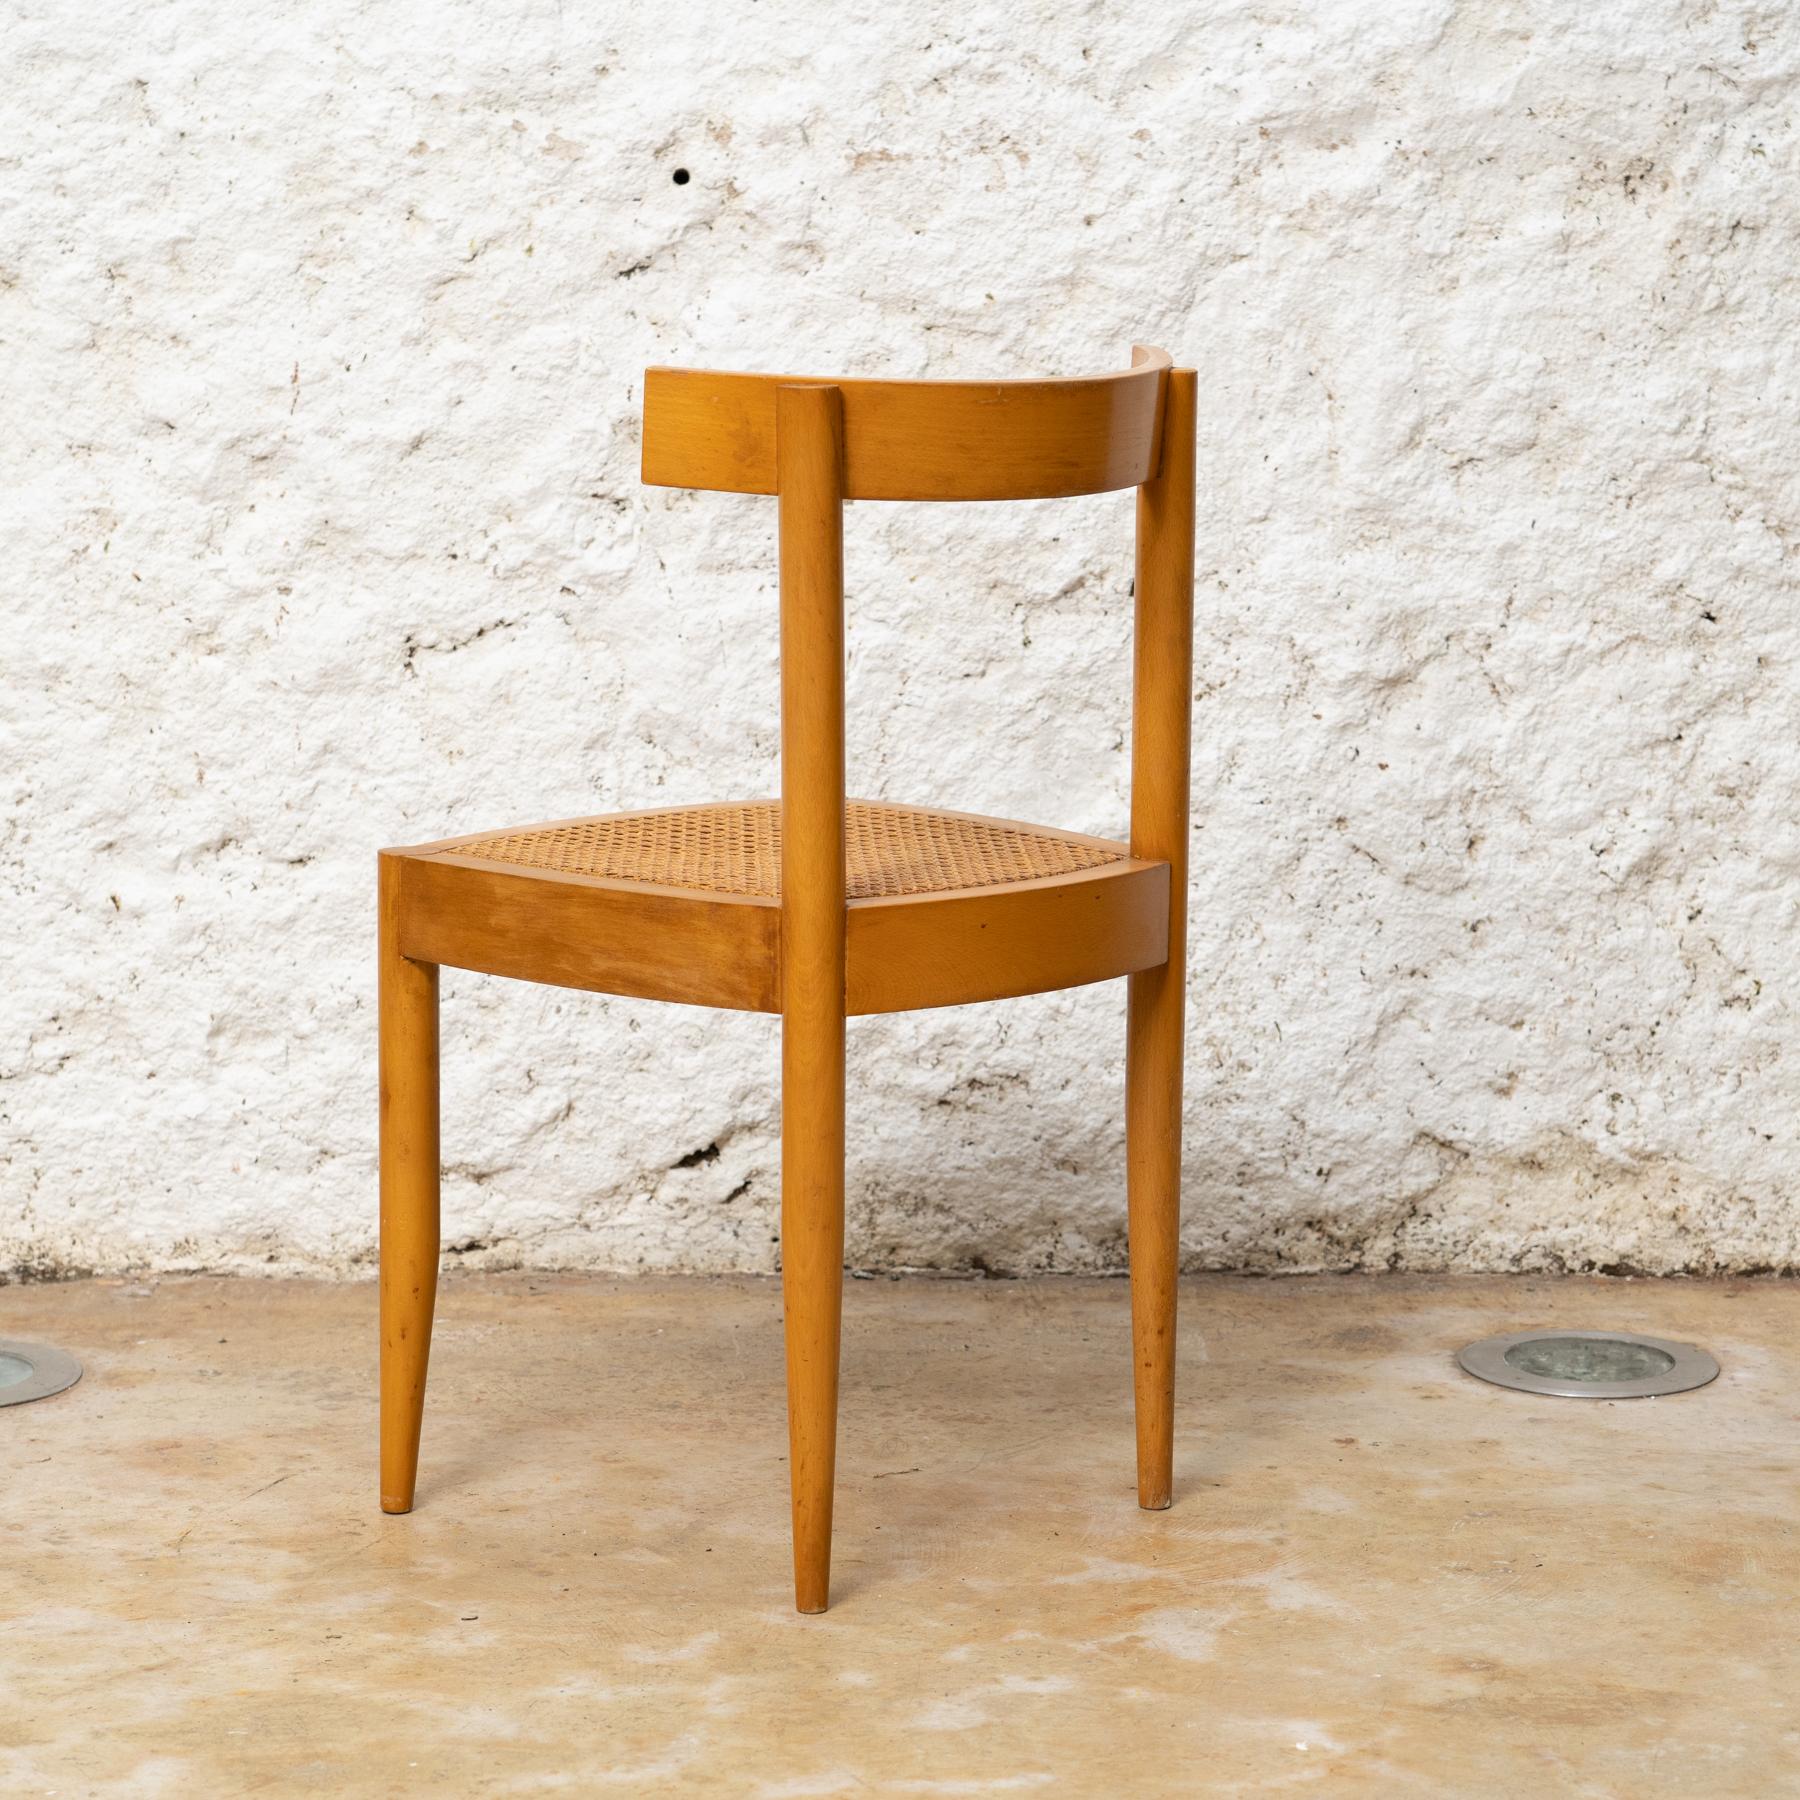 Mid-20th Century Timeless Design: 'Reno' Chair by Correa and Milà for Gres, Spain, circa 1961 For Sale